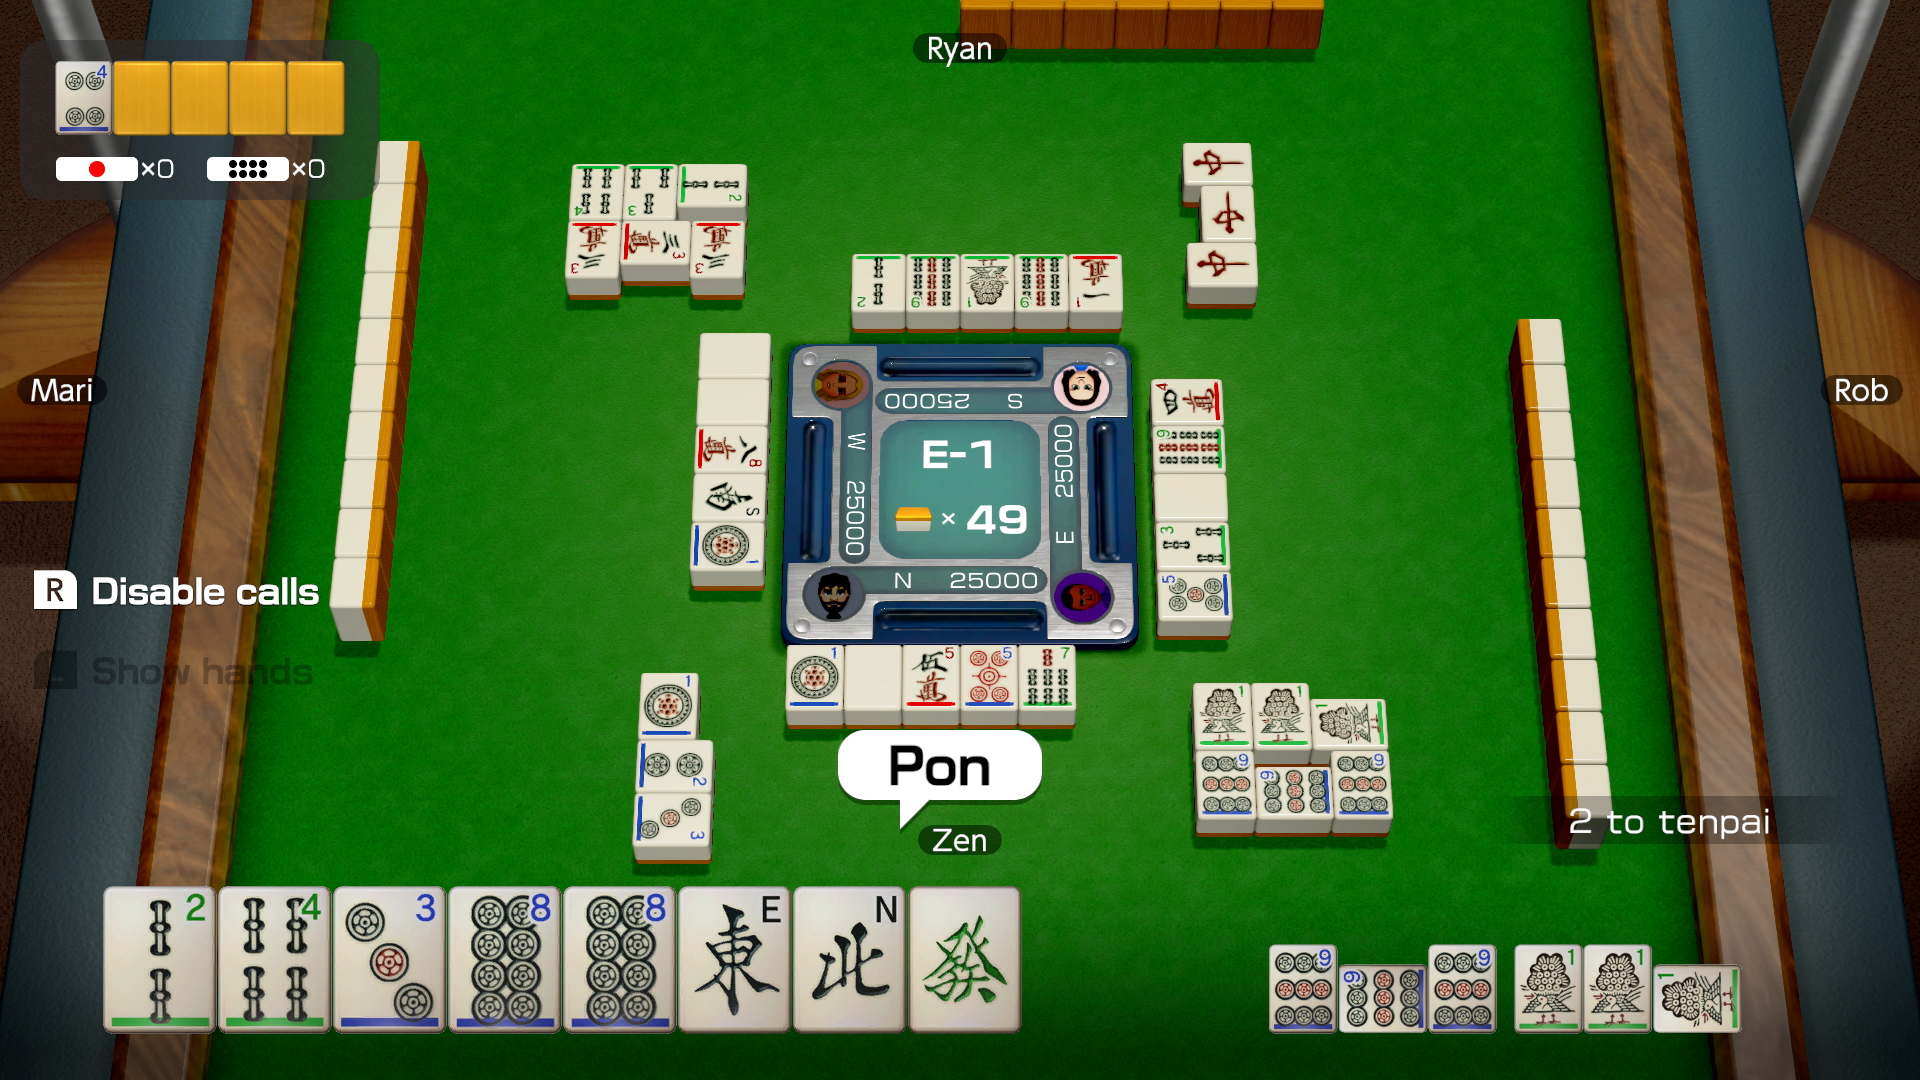 A four-player match of Mahjong where someone has called Pon